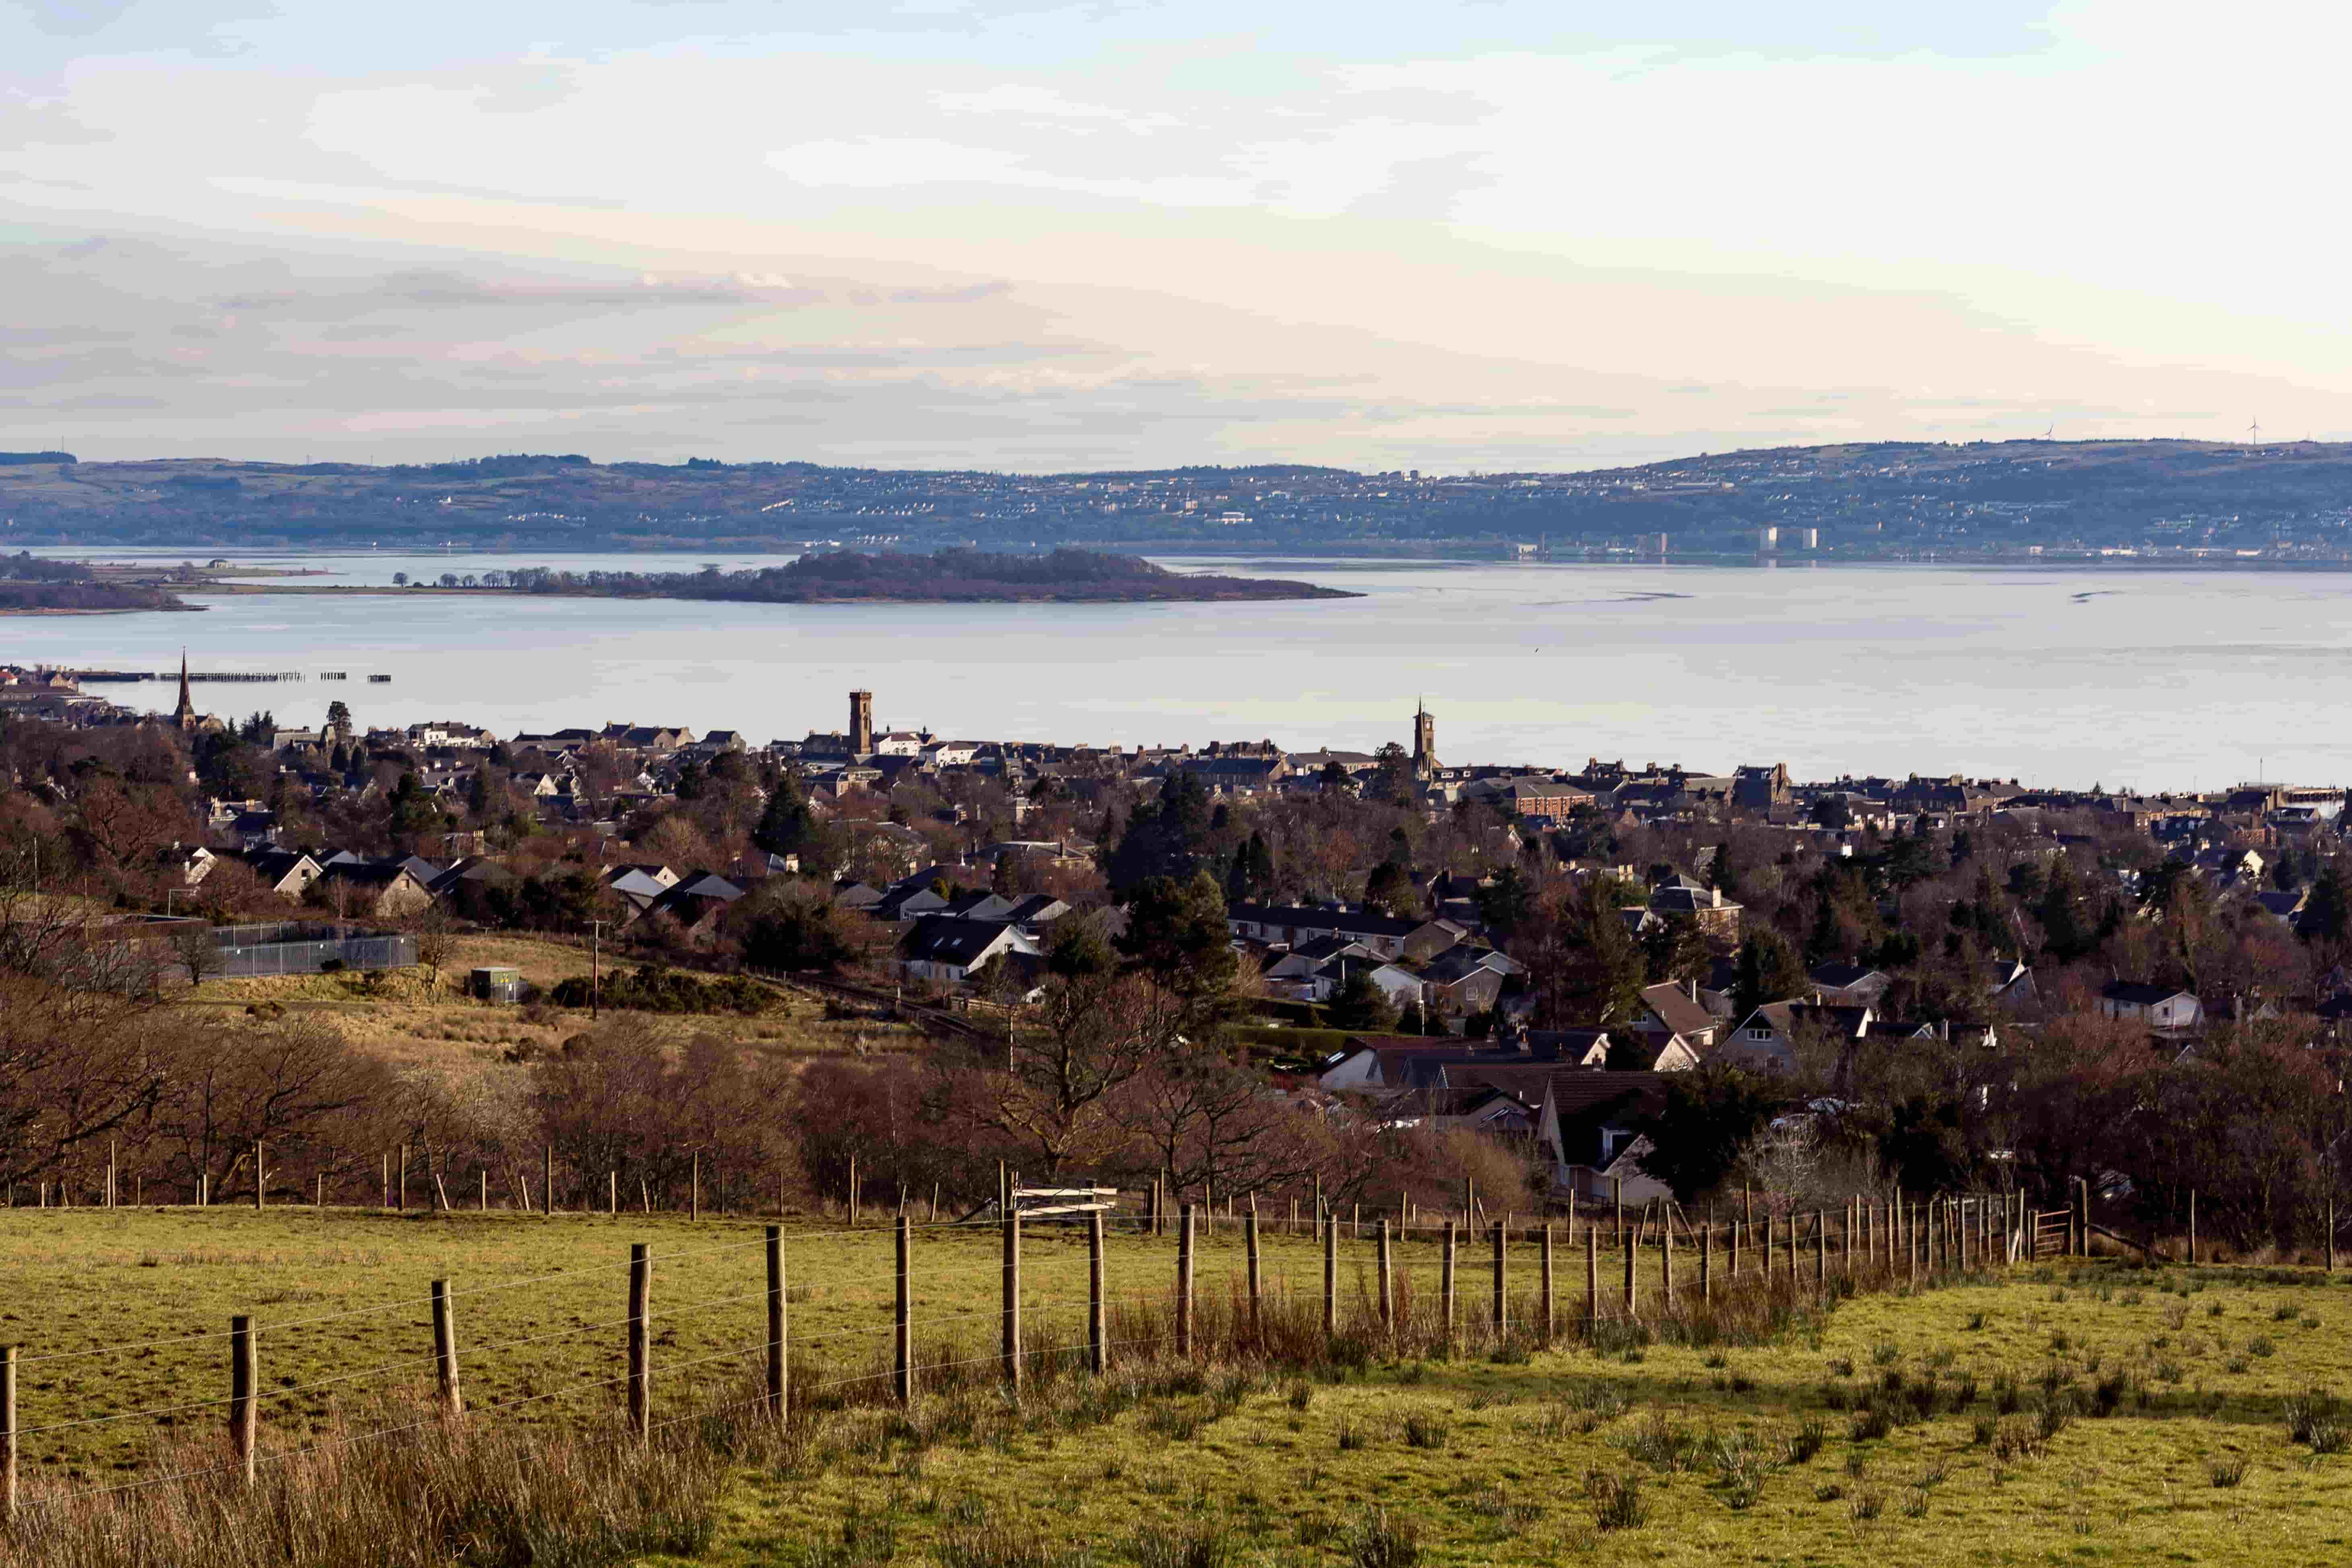 View from a hill overlooking a coastal Scottish town